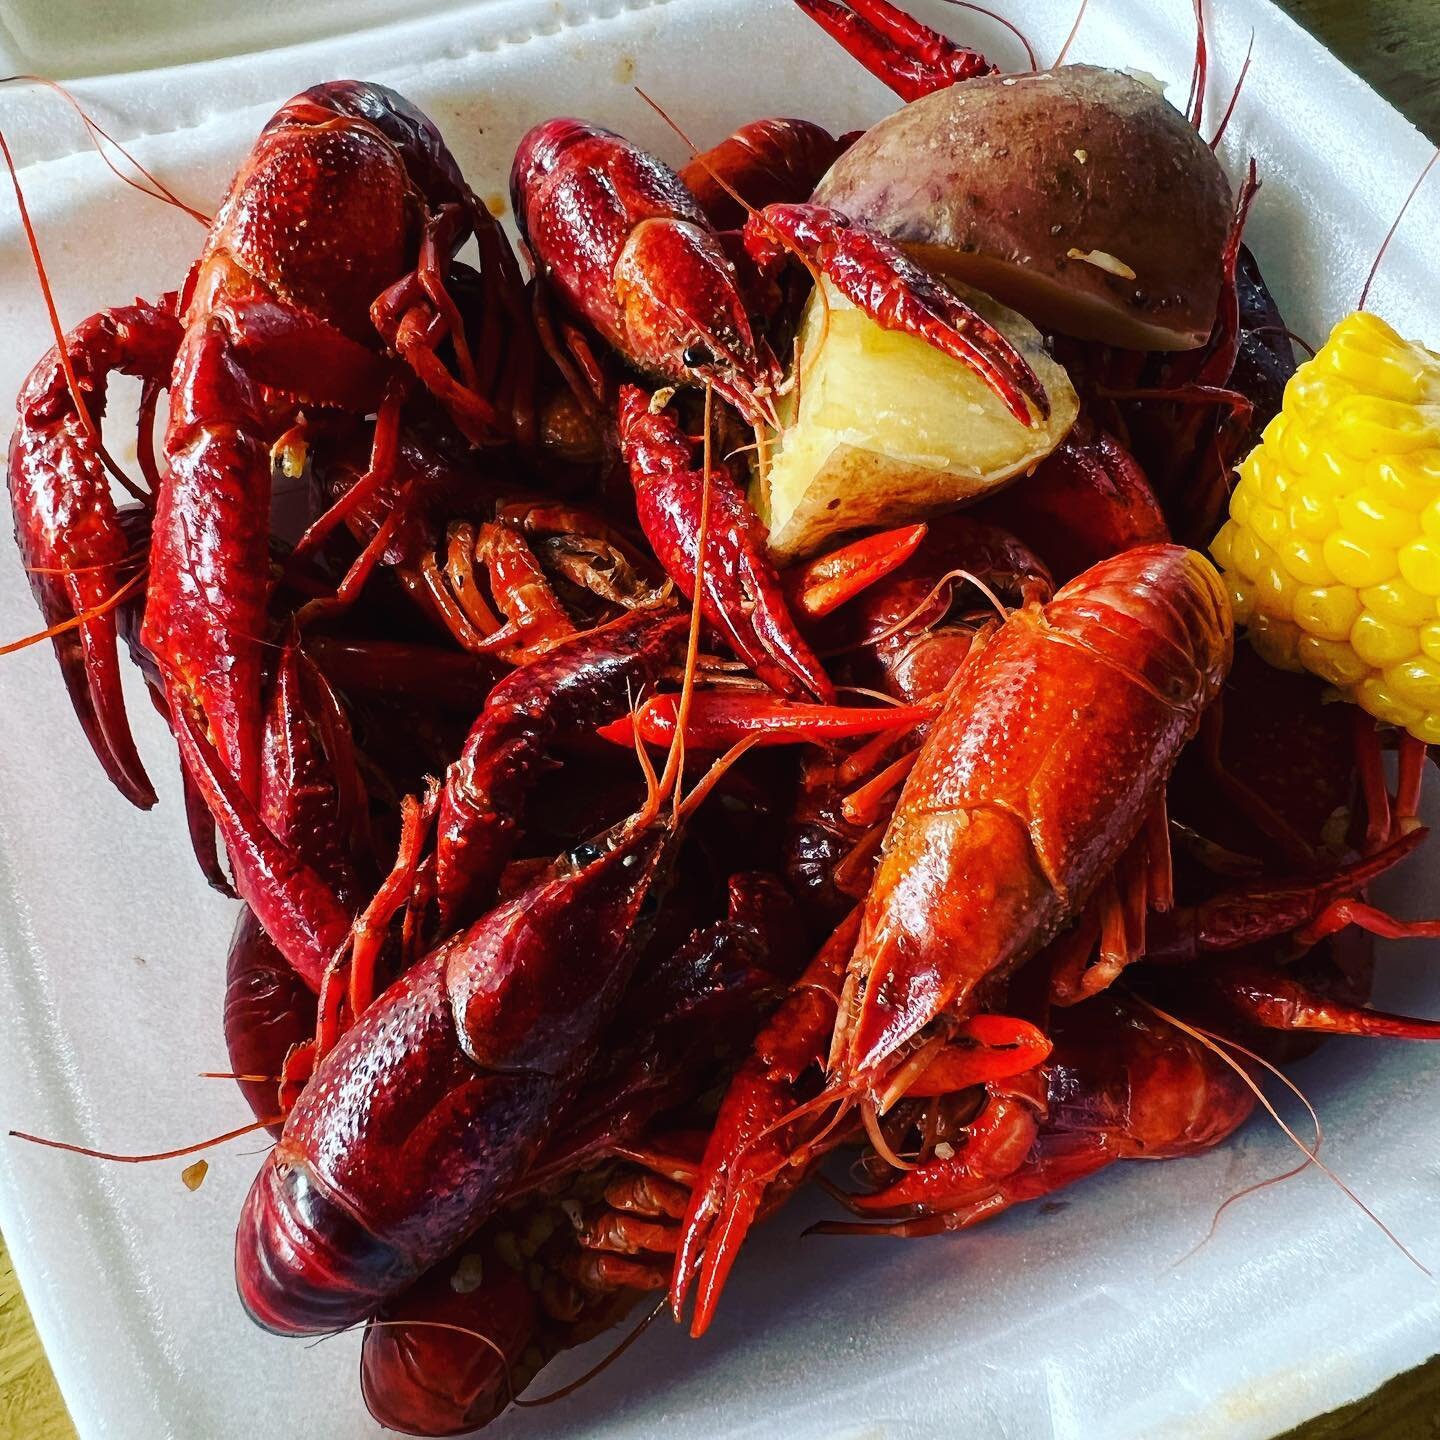 First time getting crawfish this 2022 season and the all-you-can-eat party from @crawfish2geaux and @turkeyd.a.m did not disappoint! Hot, spicy, &amp; tasty tails, bumpin music and great weather made for a fantastic afternoon outing. After sucking th